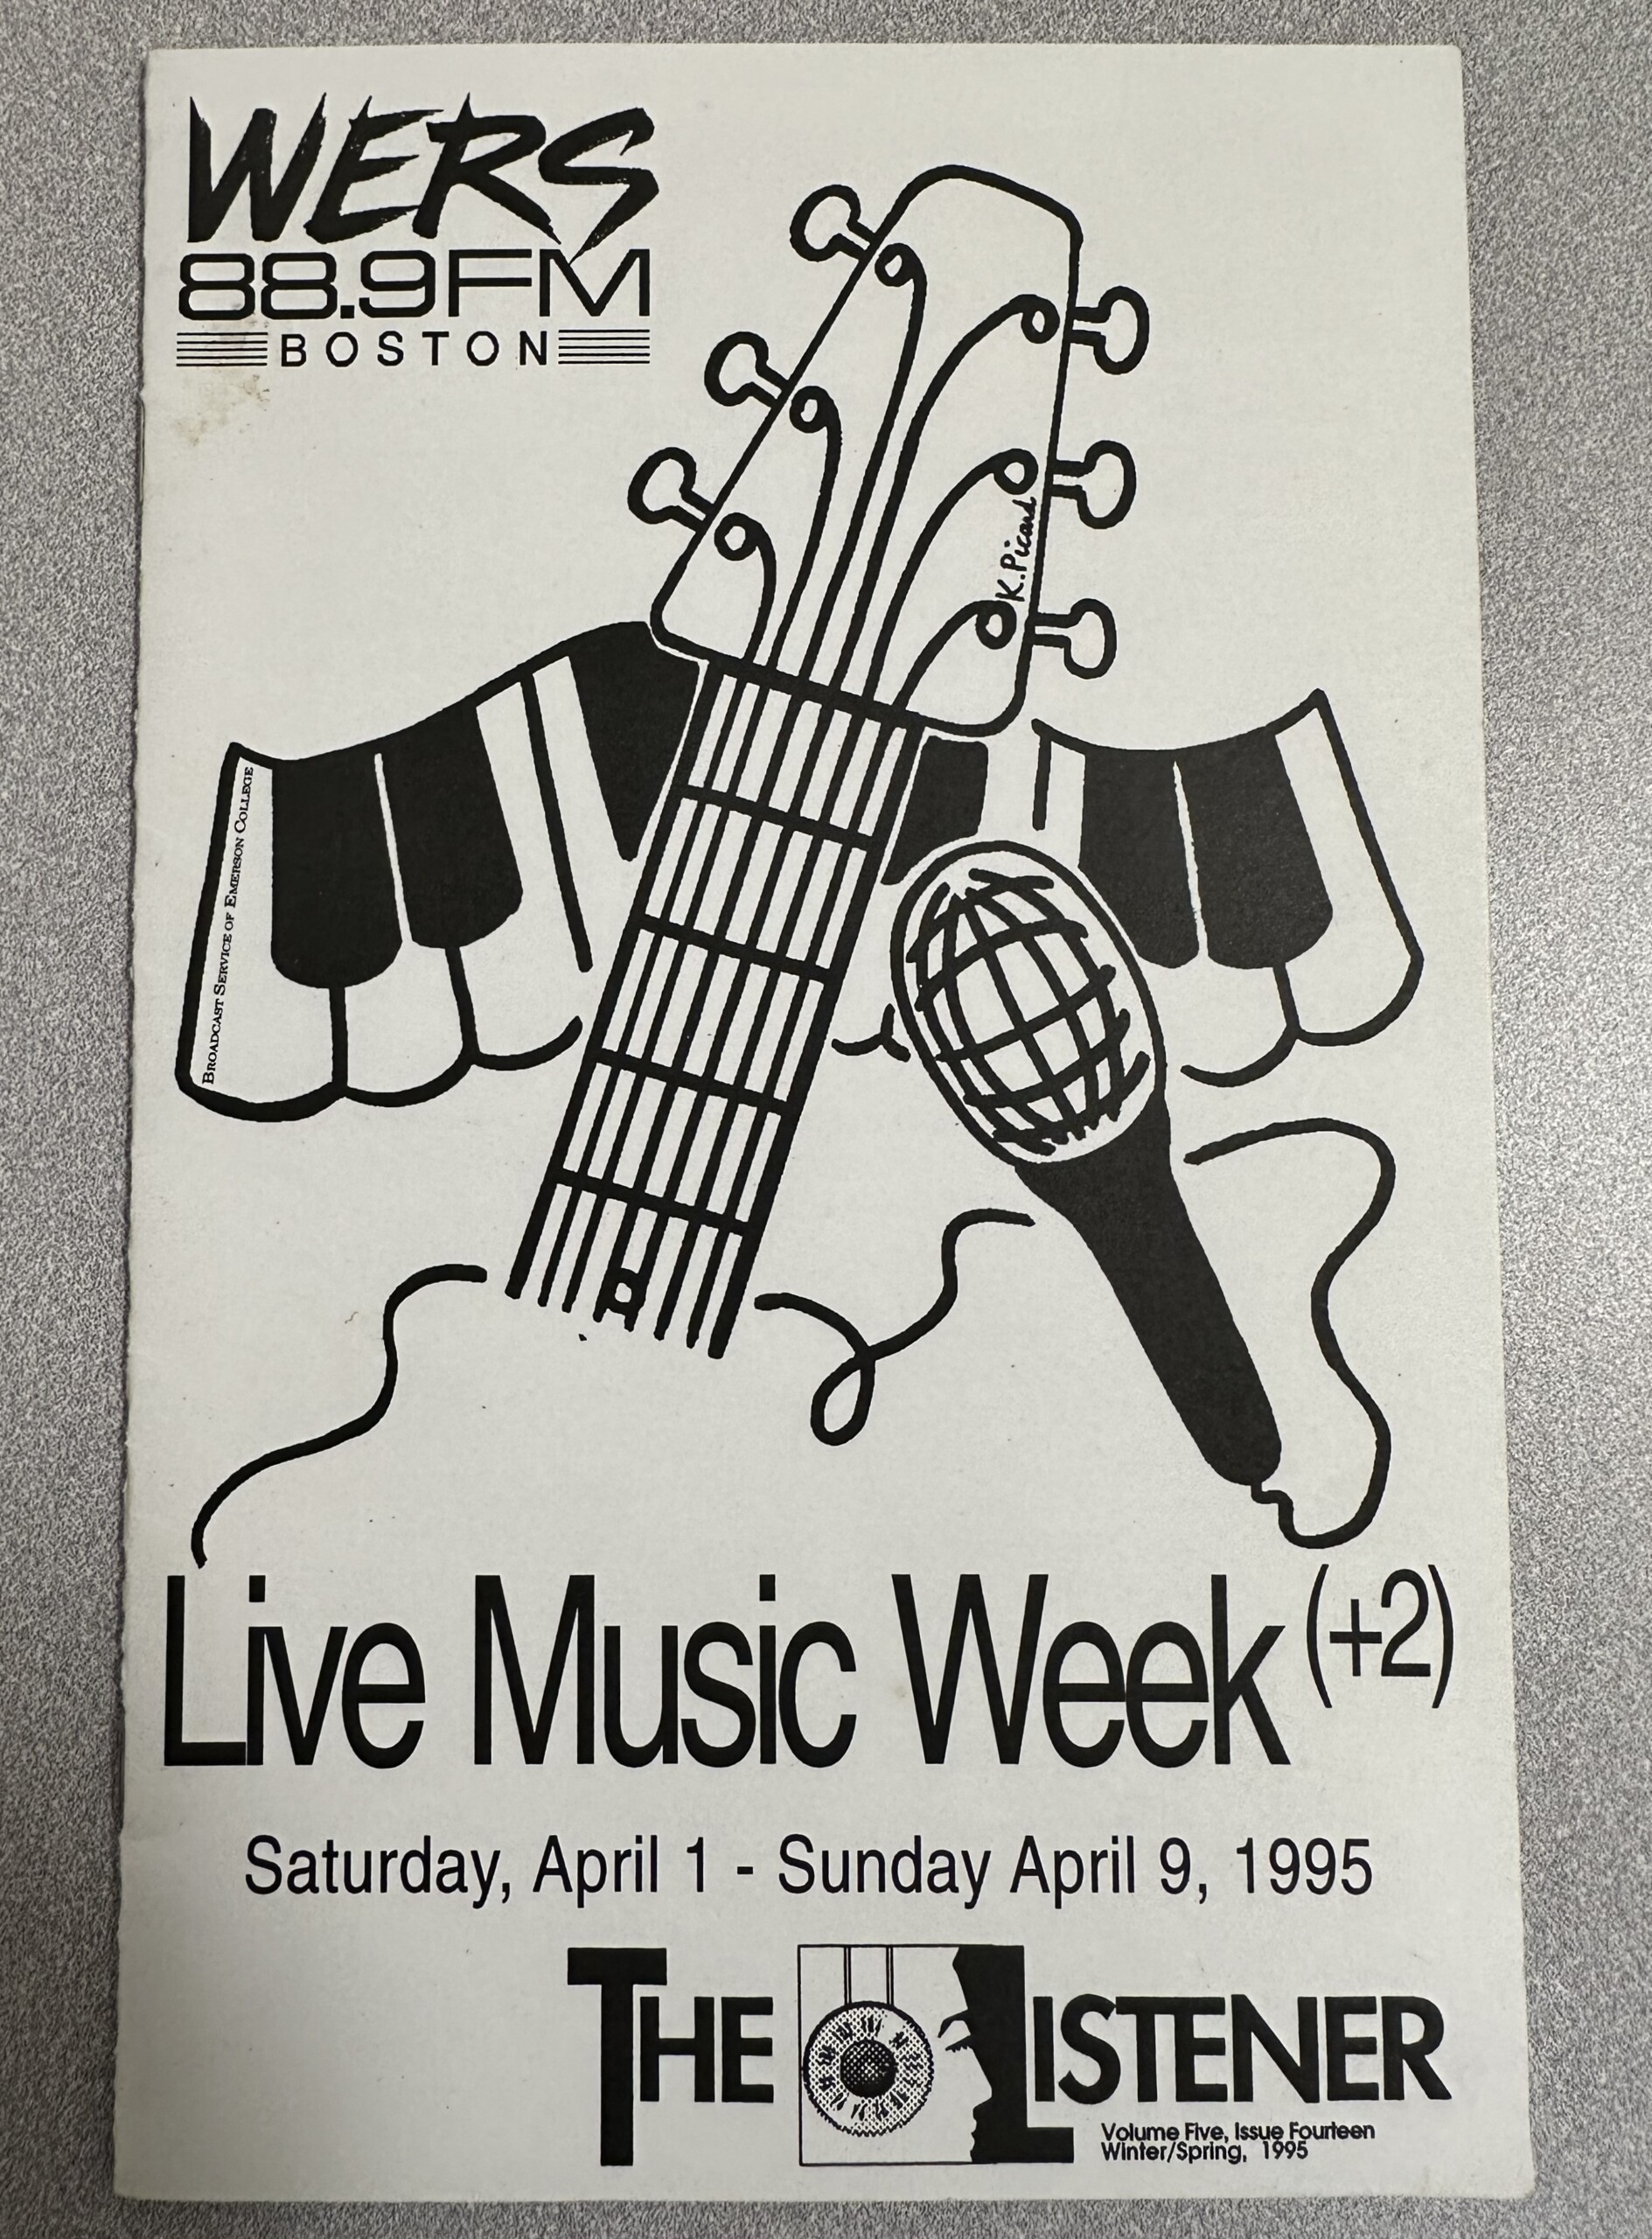 WERS' Listener Program Guide from spring 1995 announcing Live Music Week.